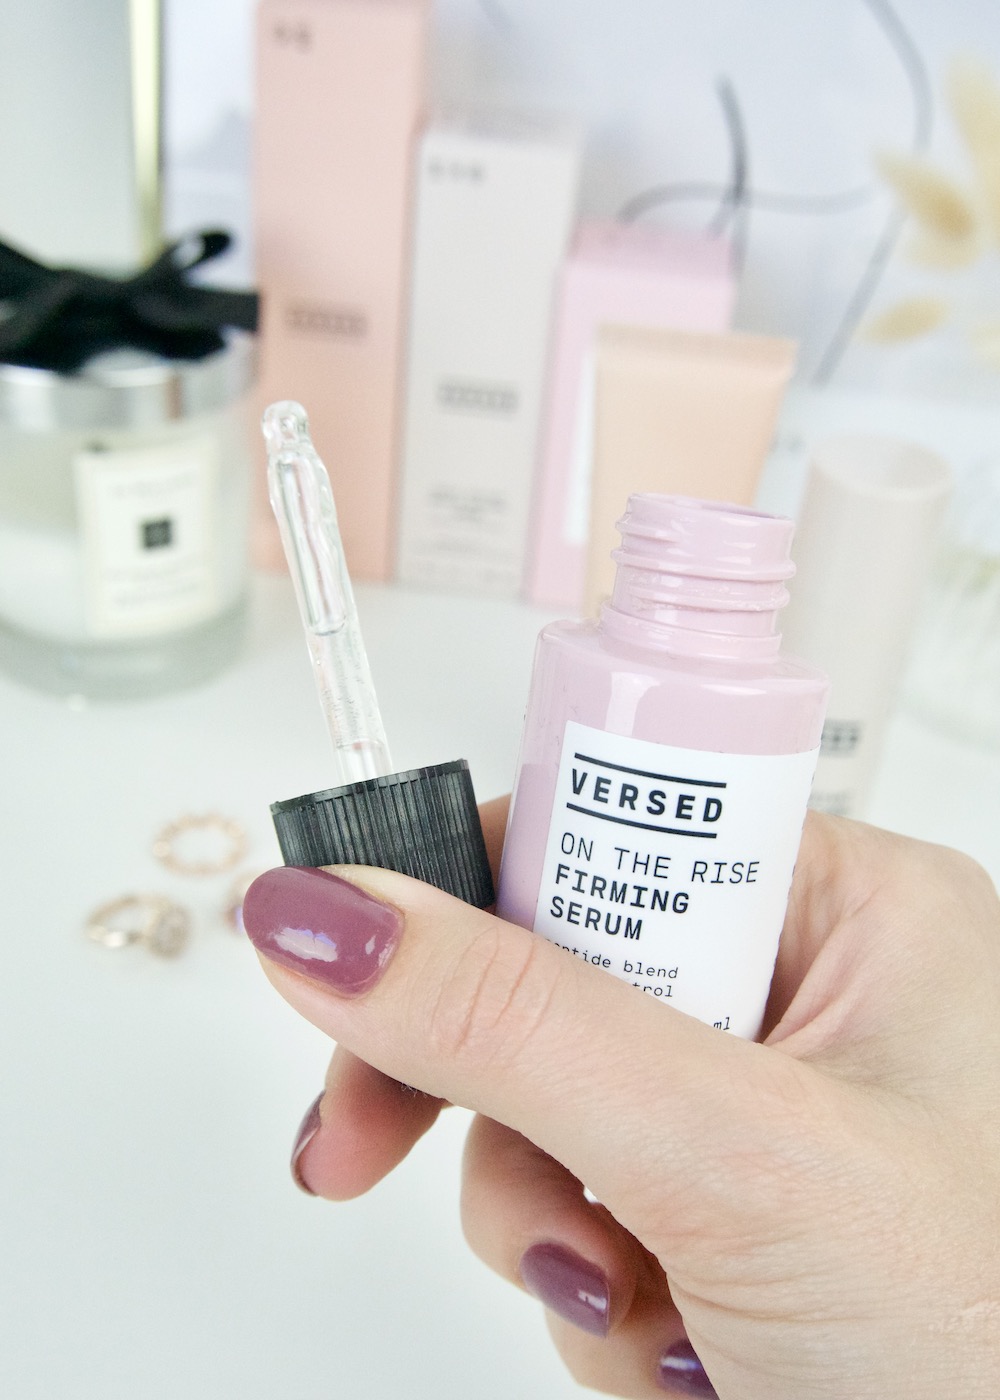 On The Rise Firming Serum in hand